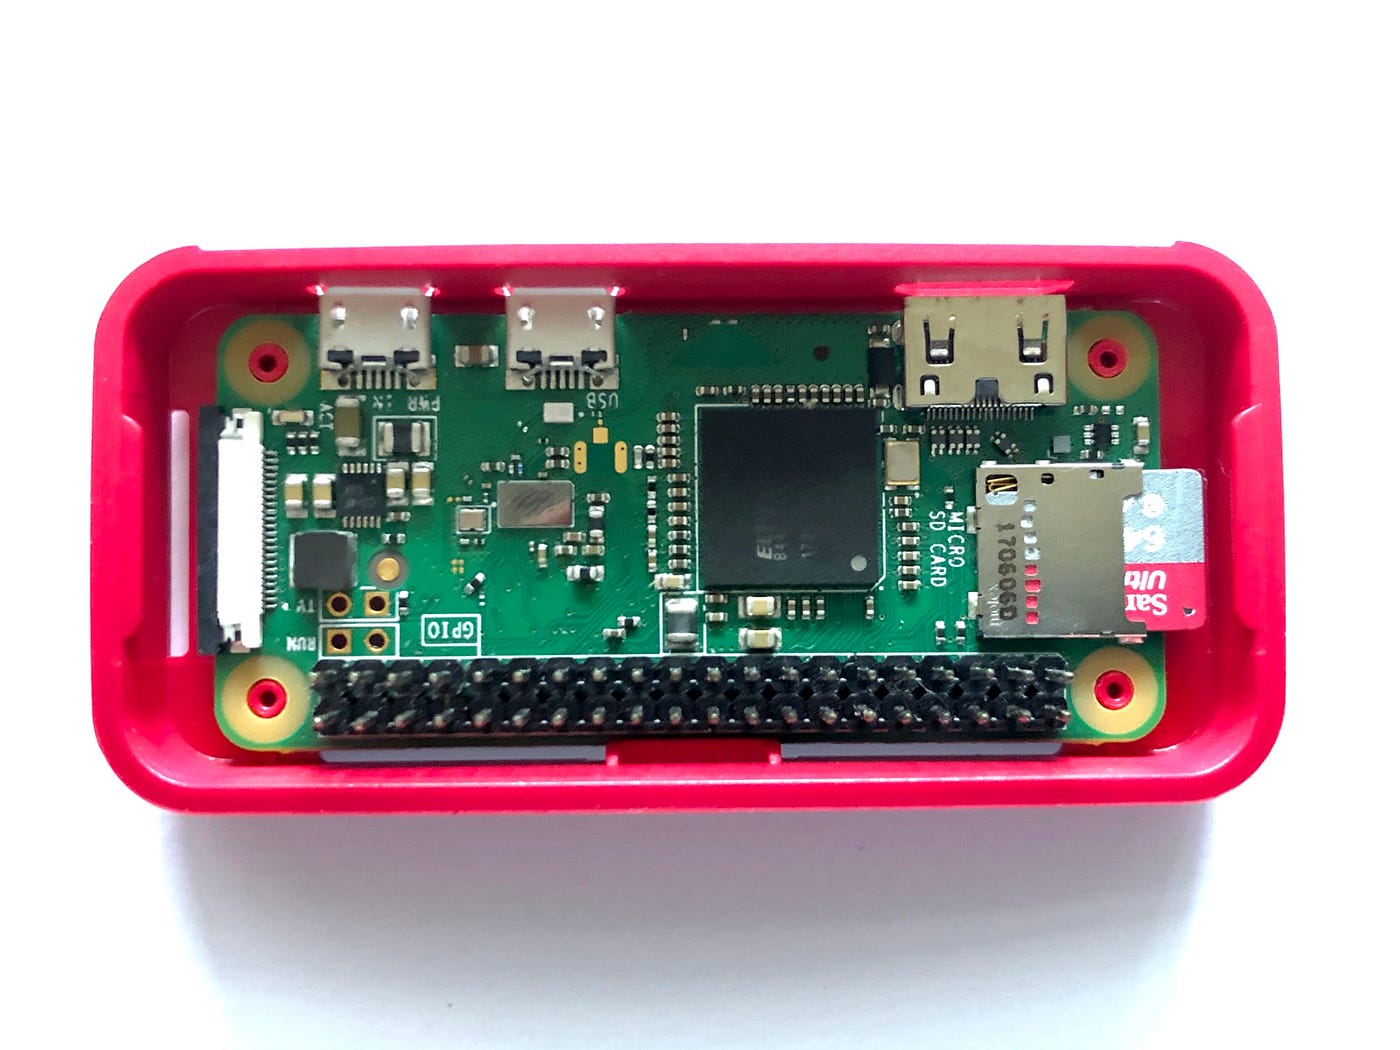 How to run Raspberry Pi Zero by a micro-USB cable and a Mac